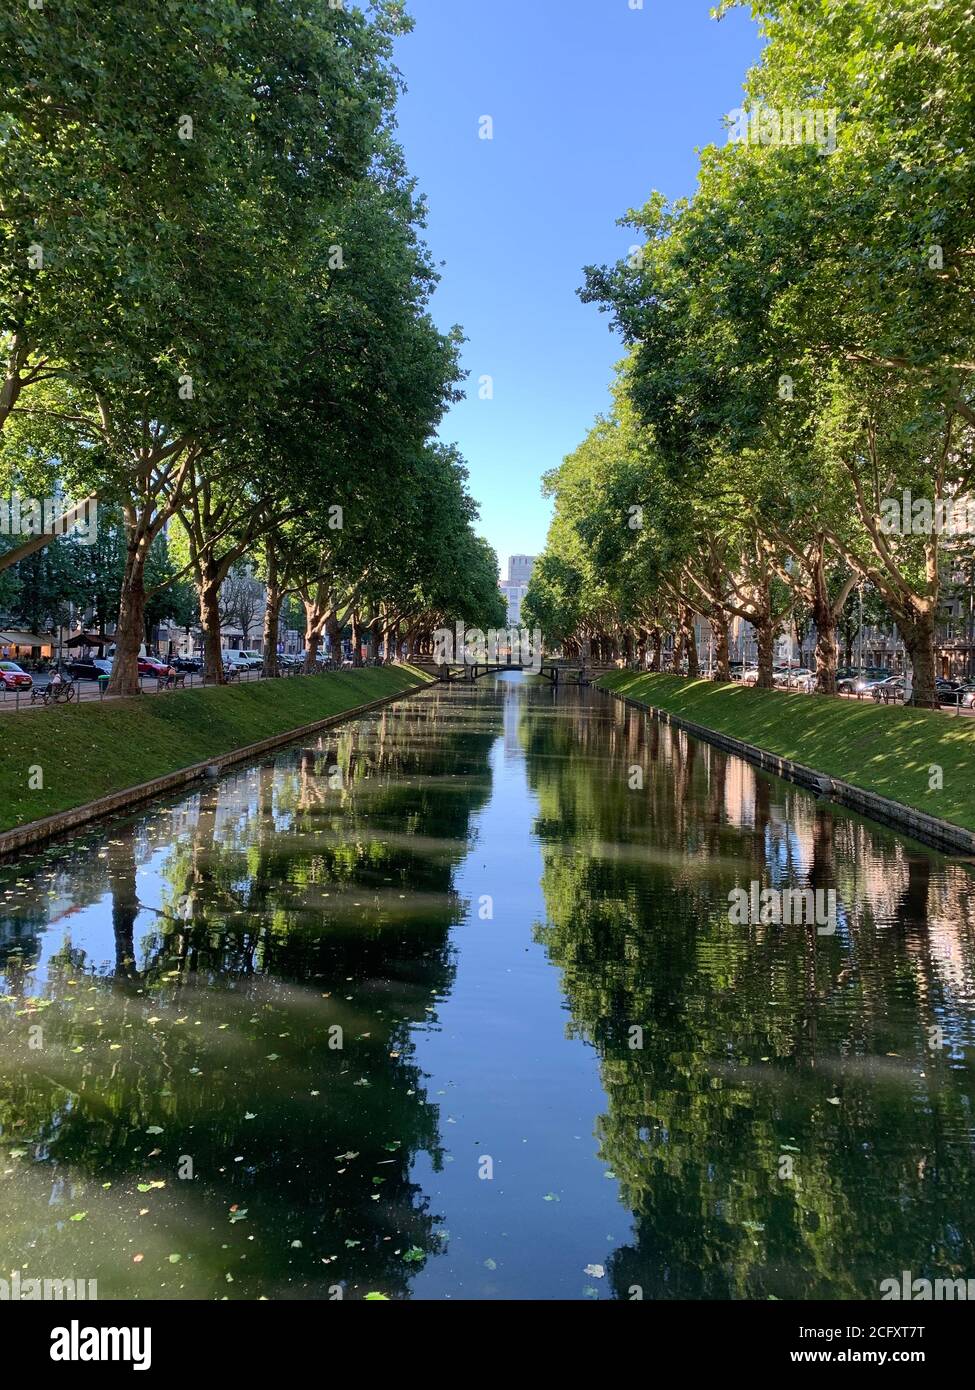 The canal at Koenigsallee (King's Avenue).This street is famous for luxury shopping. Dusseldorf, Germany Stock Photo